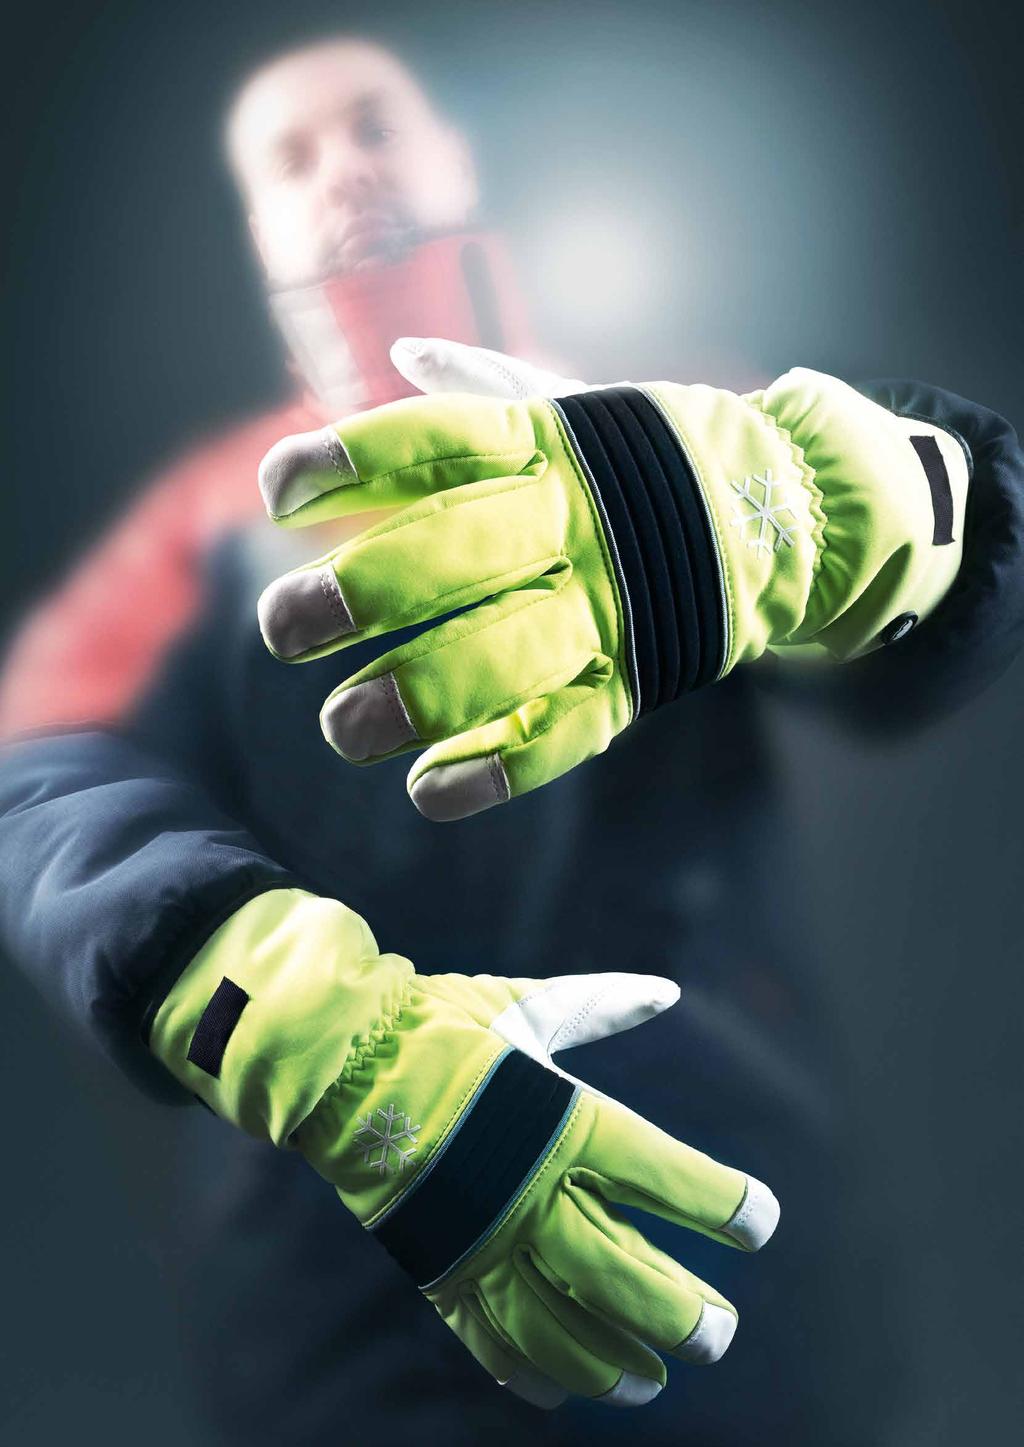 Protective function The European Directive 89/686/EEC provides clear specifications for the production and marketing of Personal Protective Equipment (PPE).